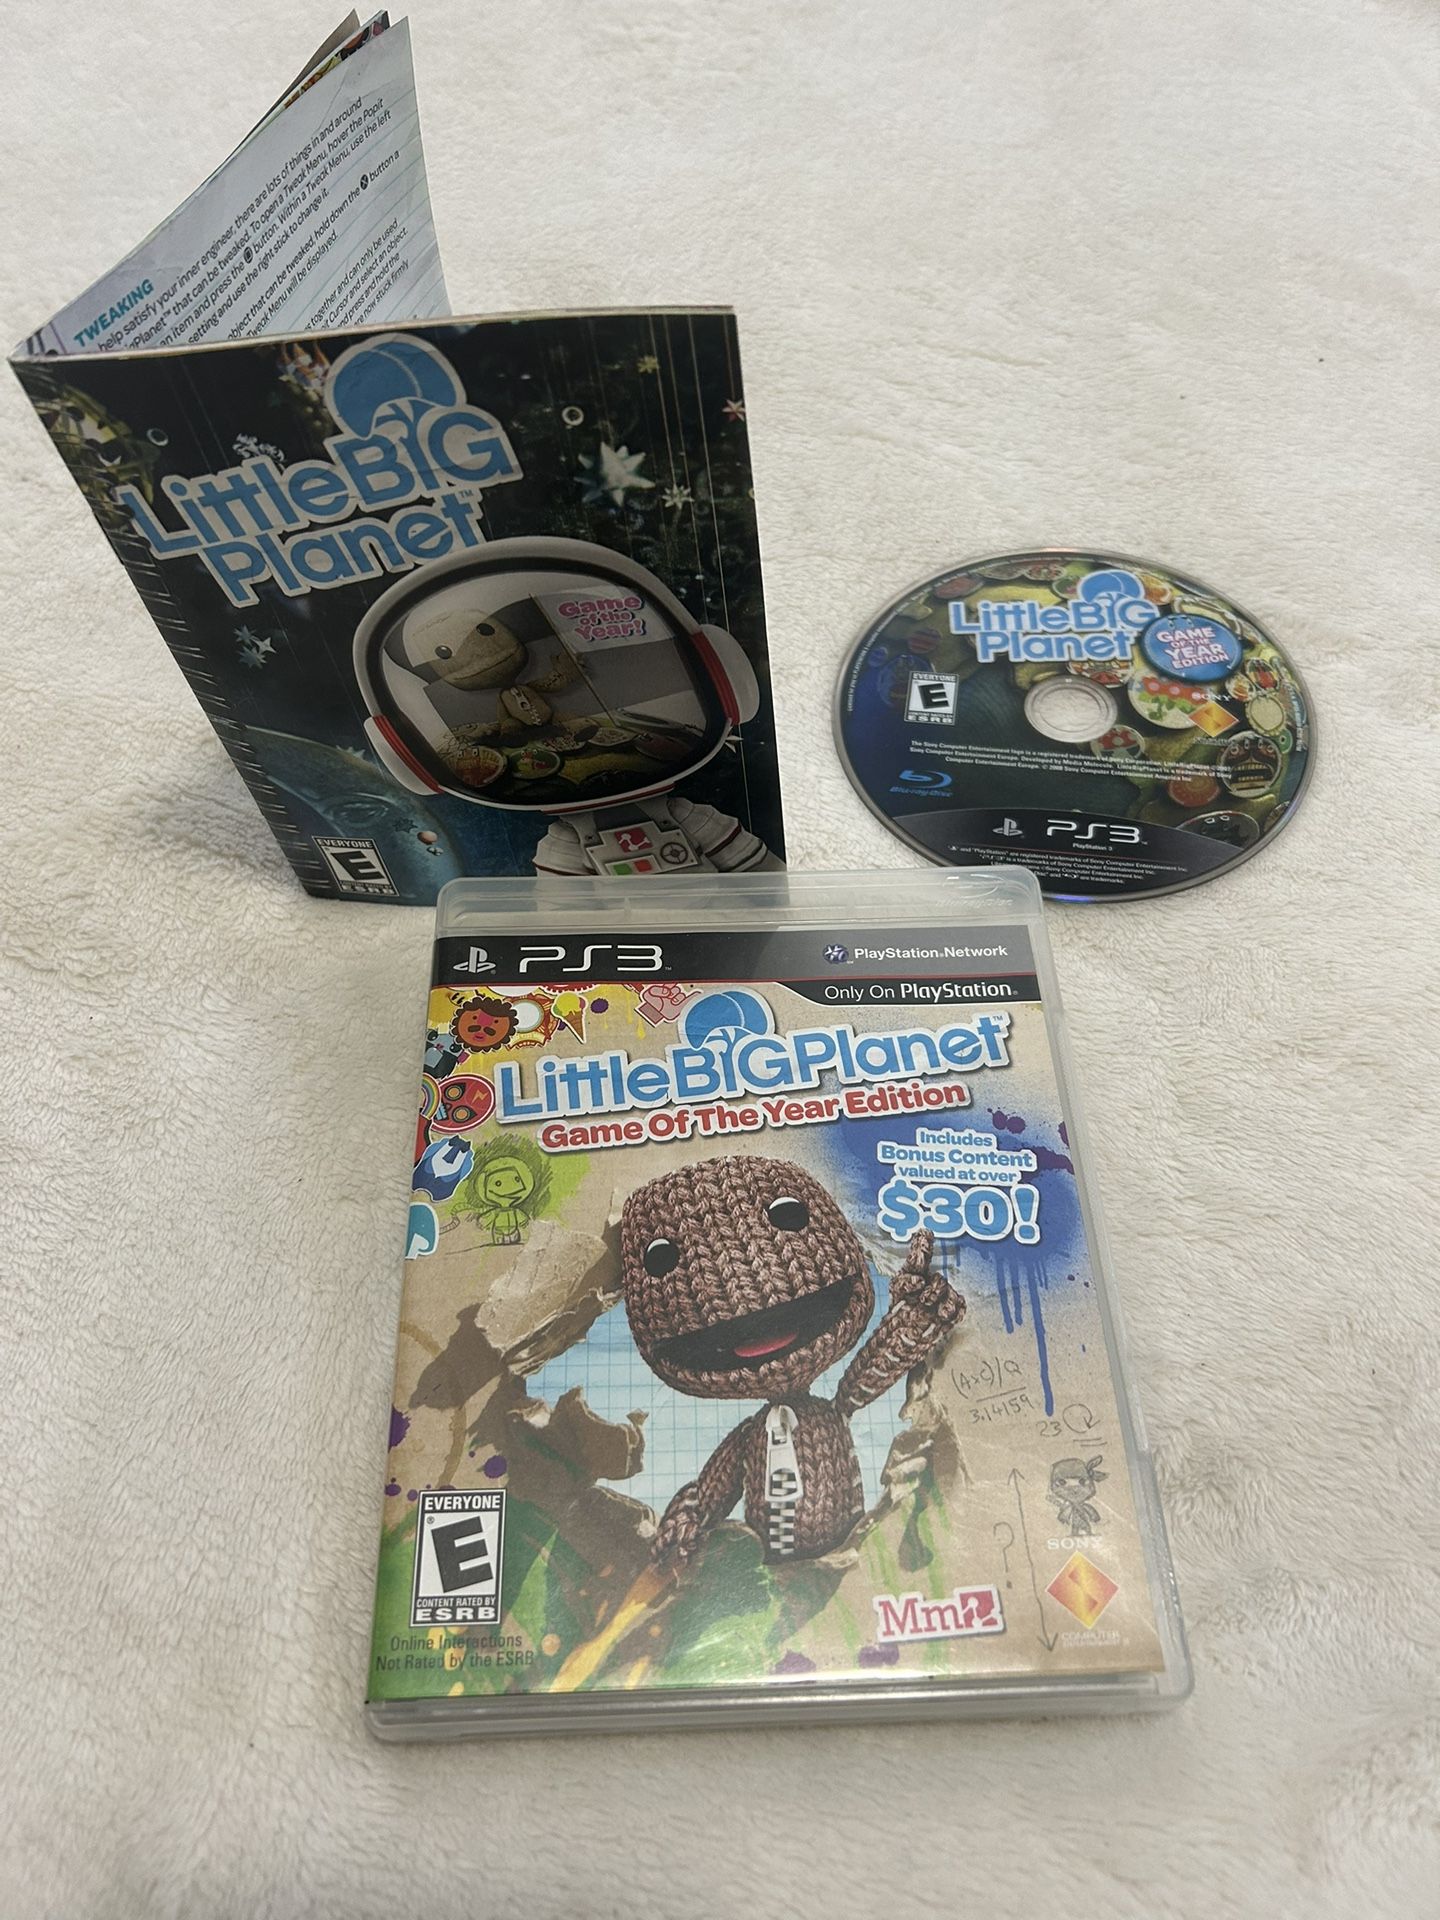 LittleBigPlanet -- Game of the Year Edition (Sony PlayStation 3, 2009)